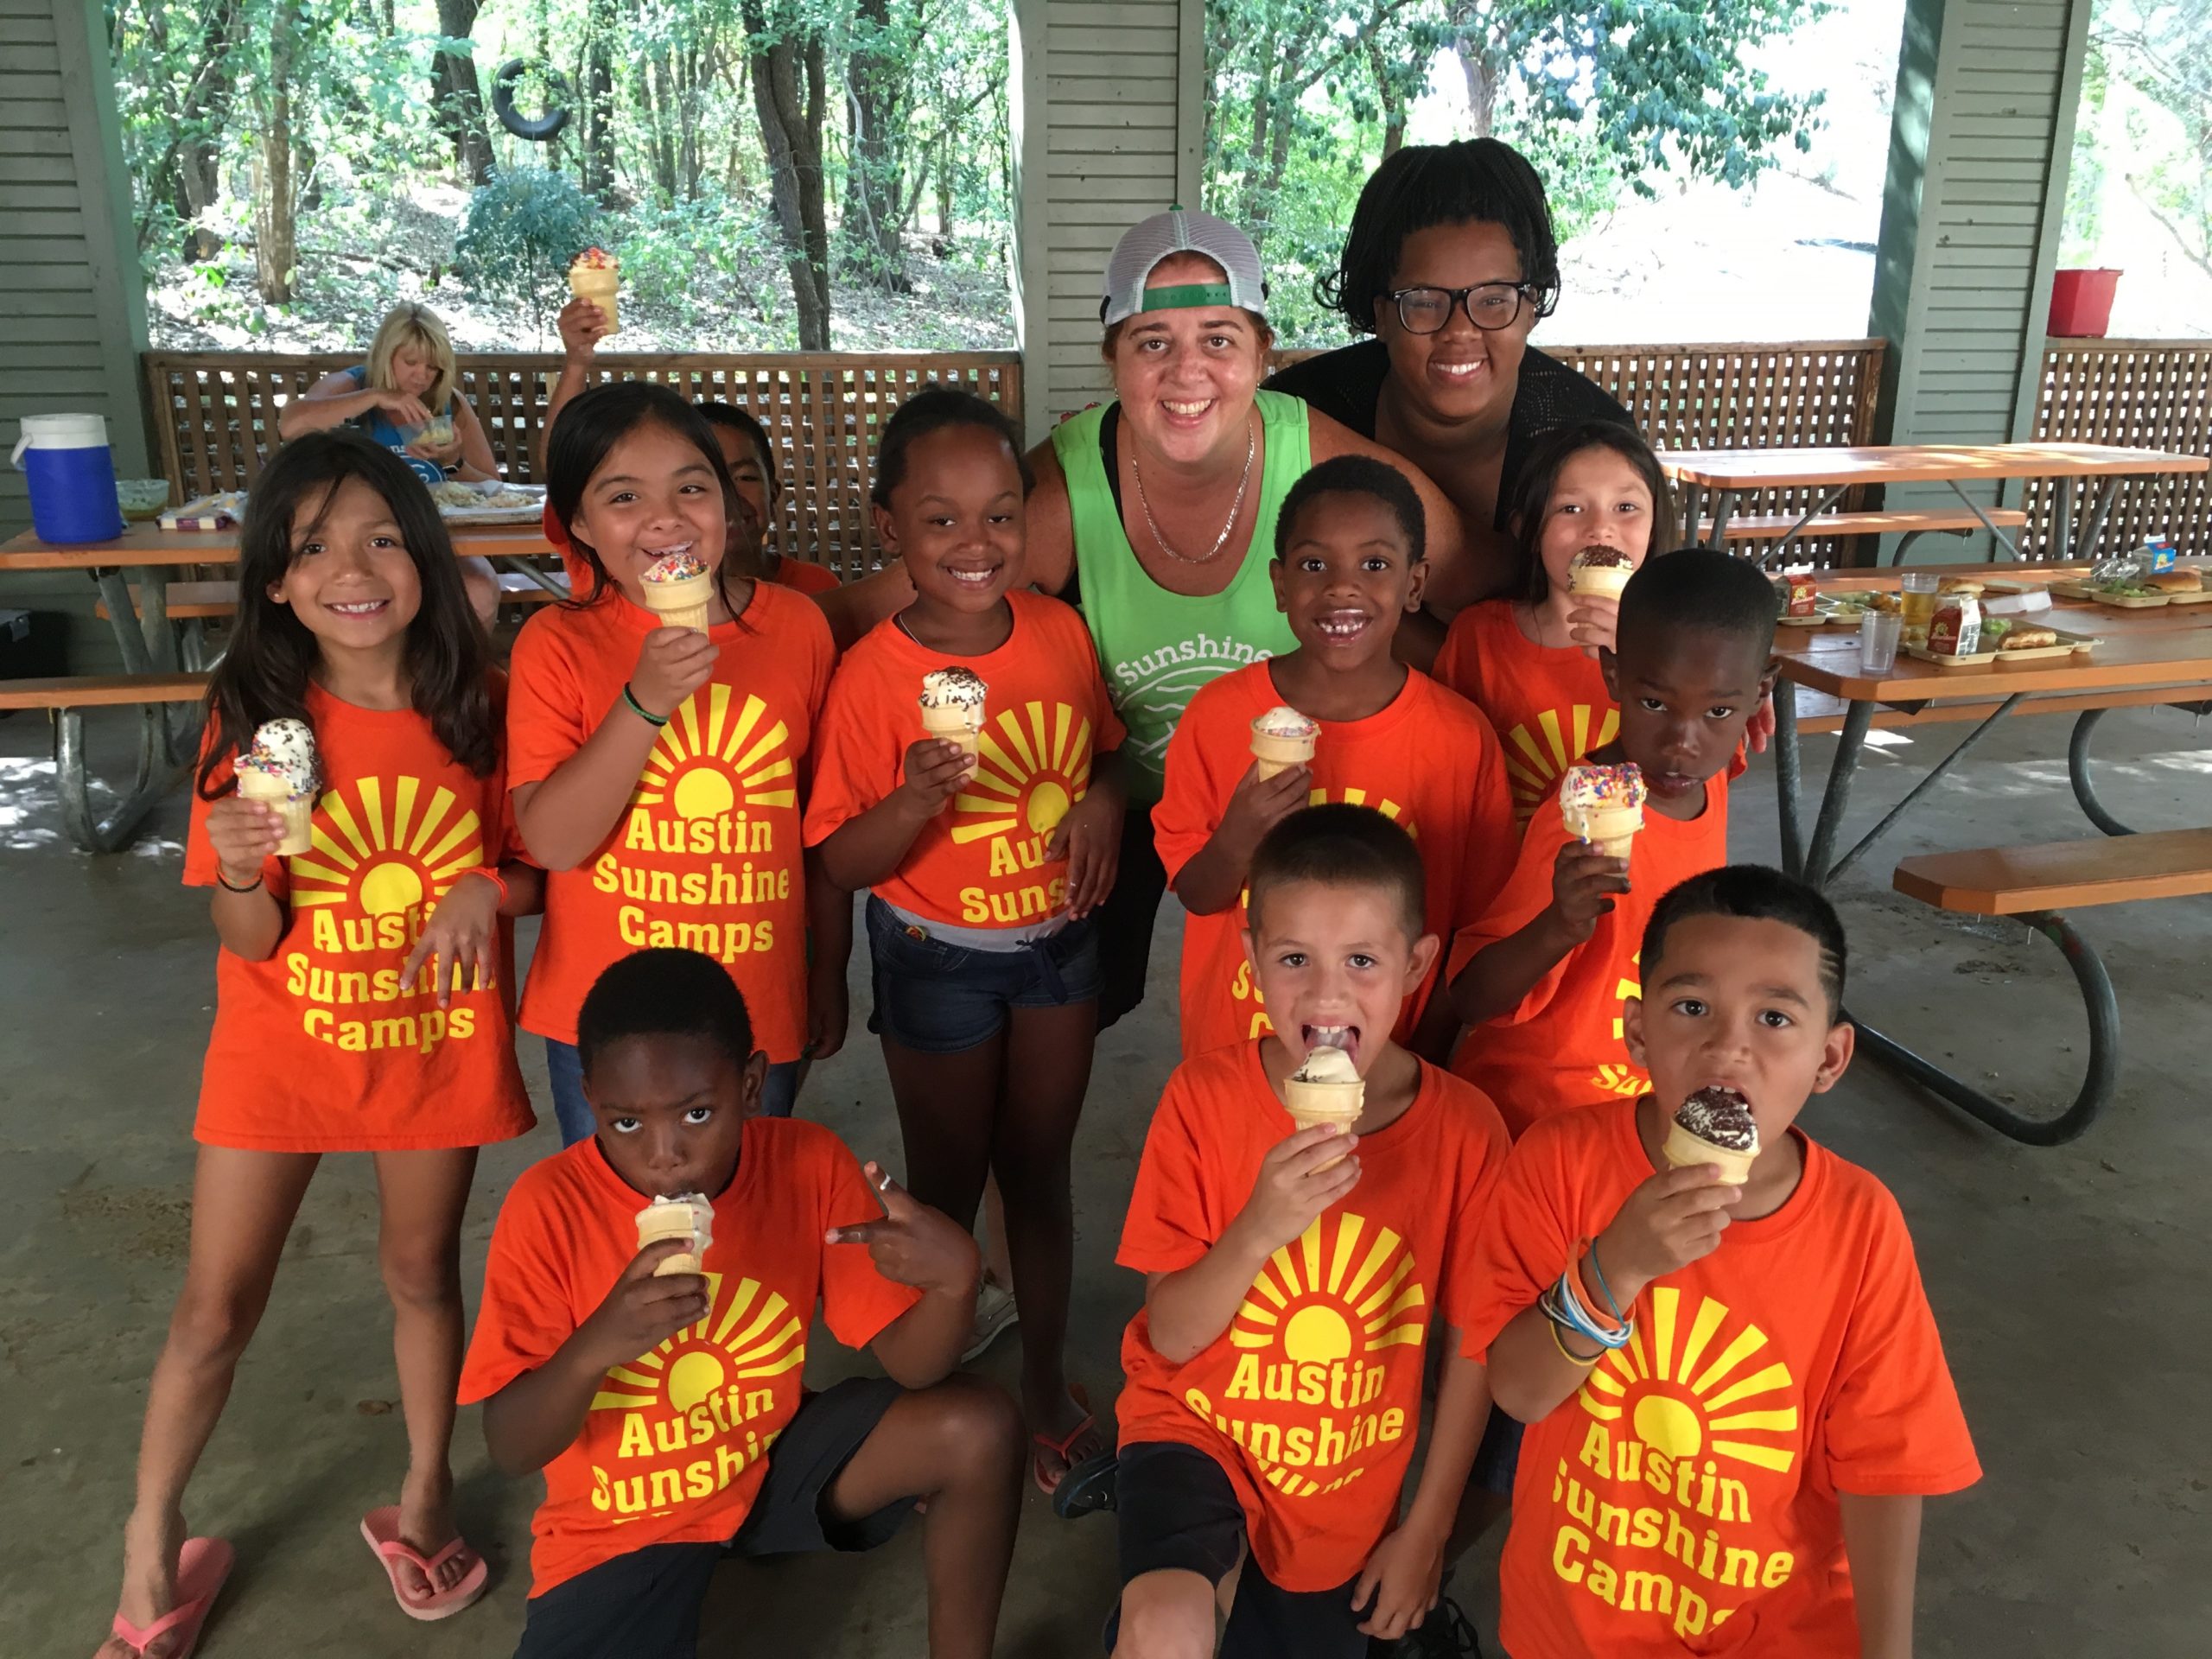 A group of Austin Sunshine Camp campers